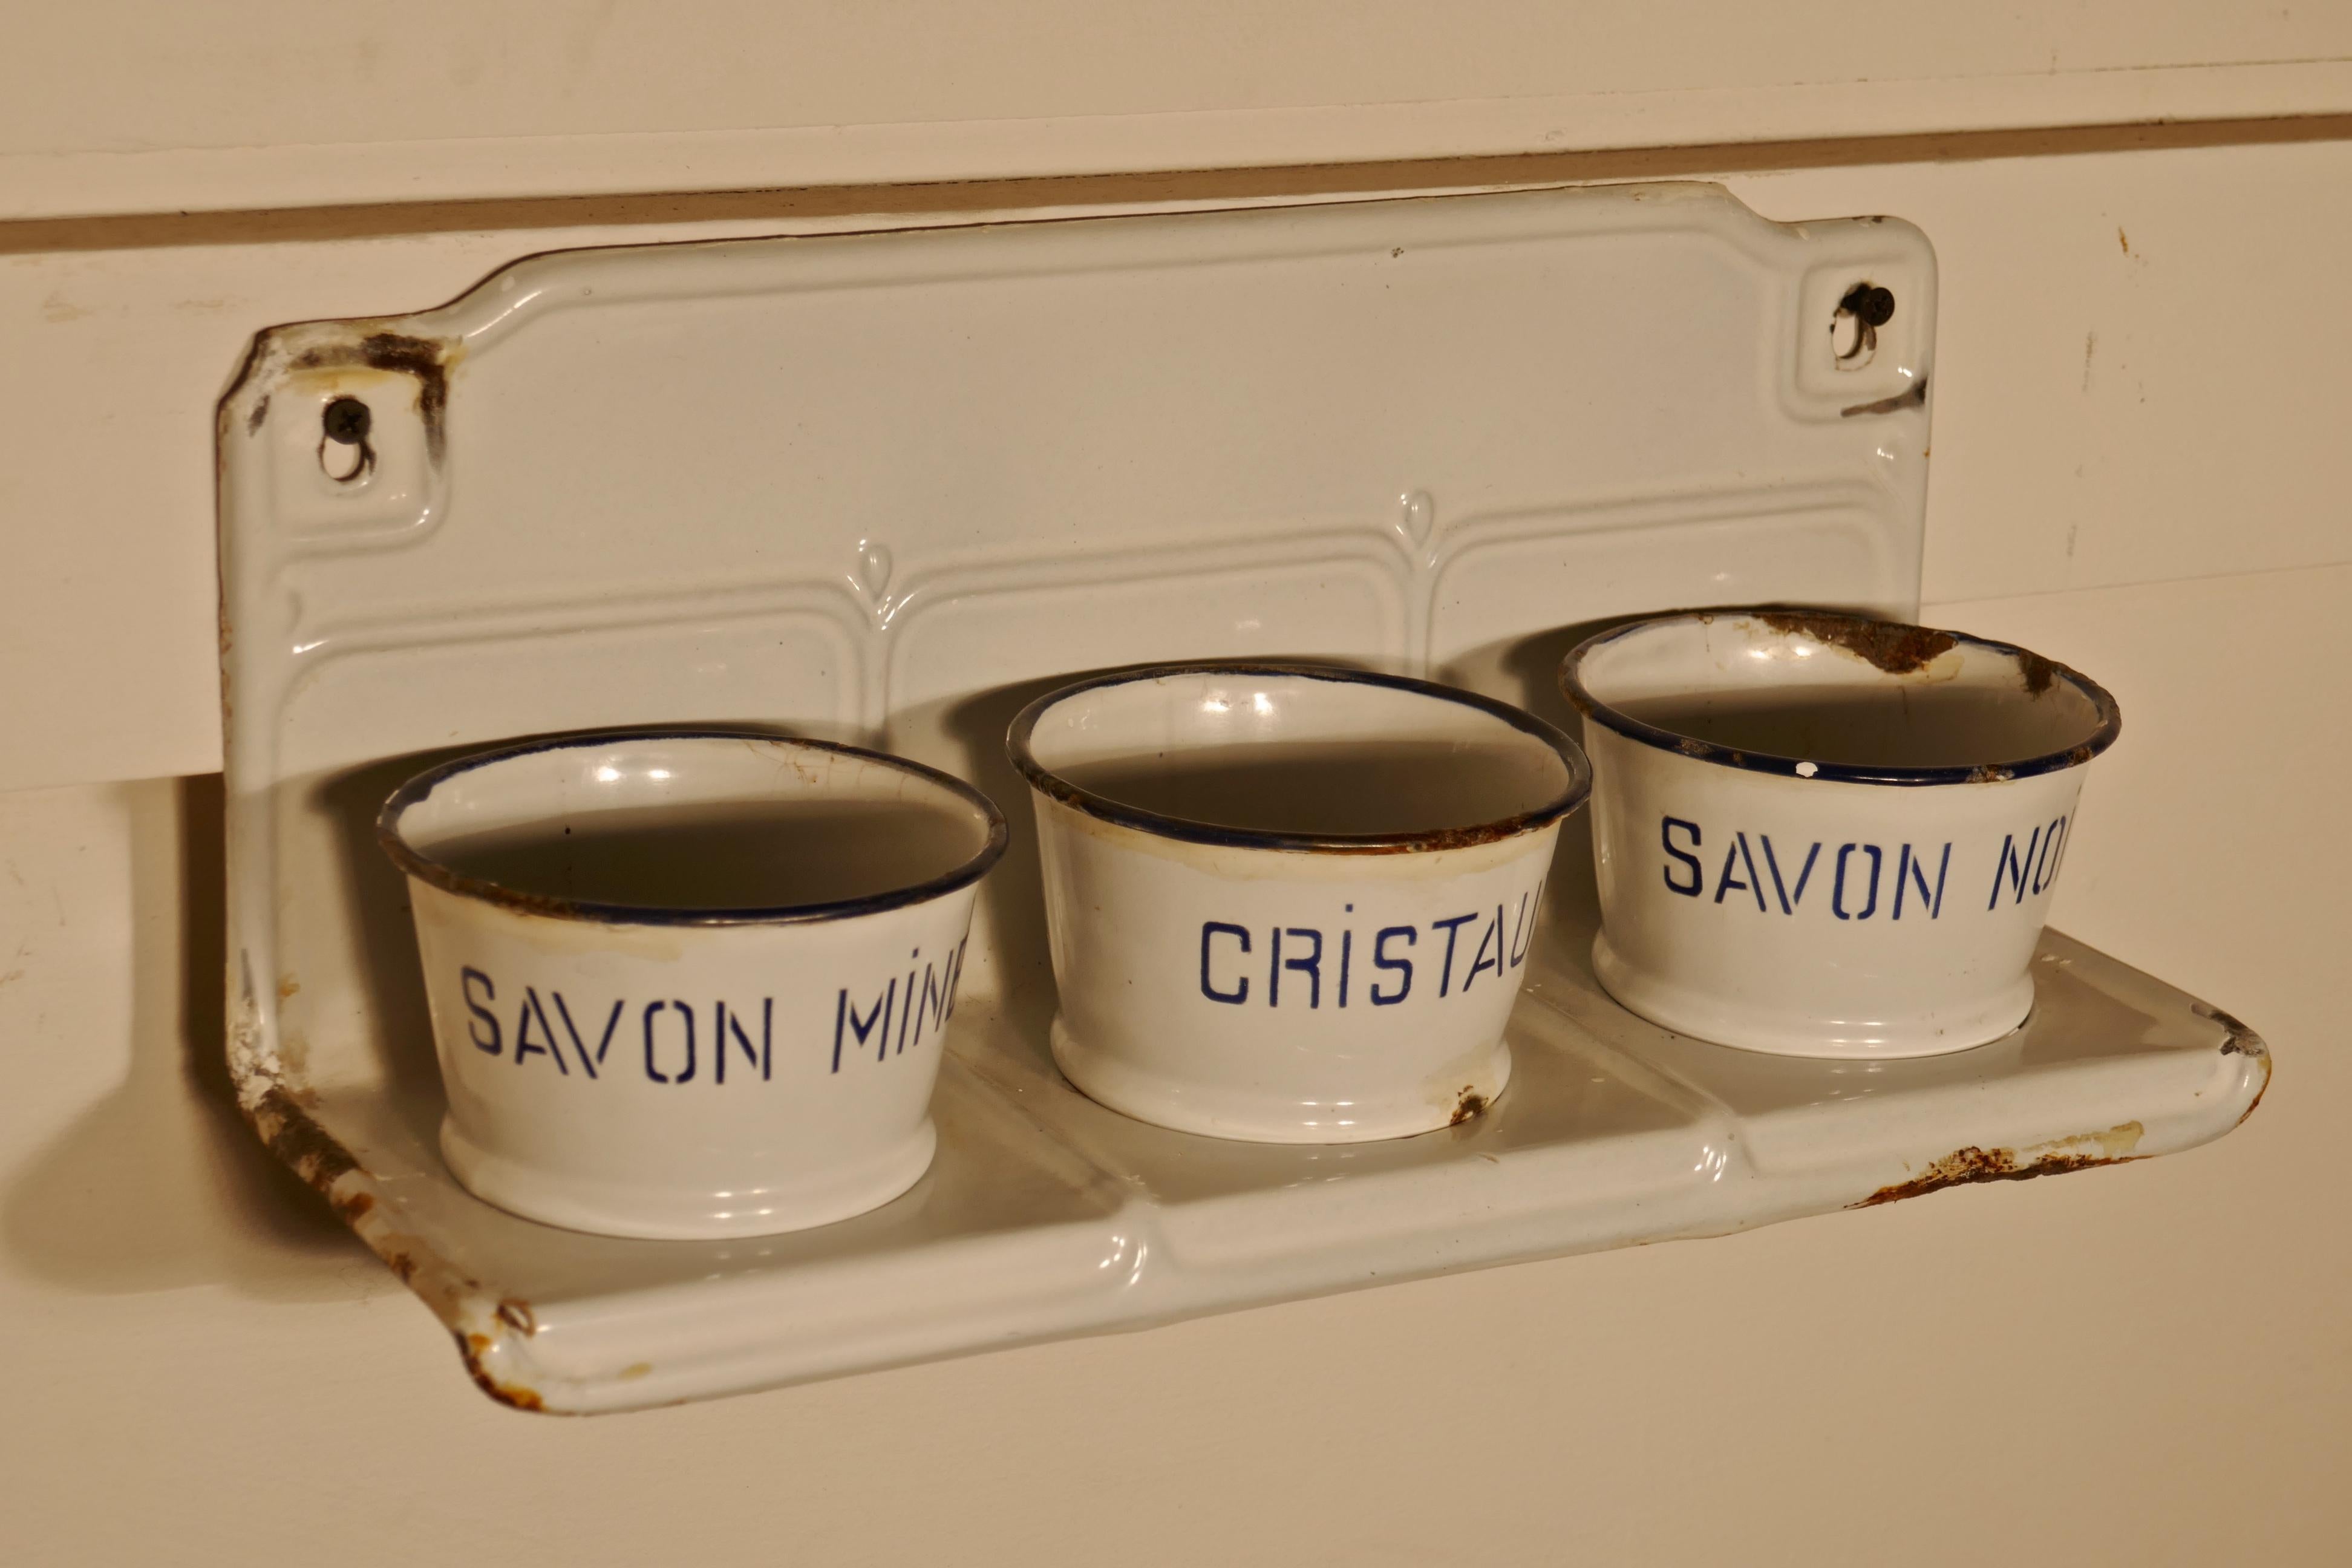 French enamel, three Canister soap dish laundry set

A good white with blue detail soap Canister laundry set in its rack, the set is complete, it has a wall hanging rack which accommodates the three soap containers, Savon Noir, Cristaux and Savon